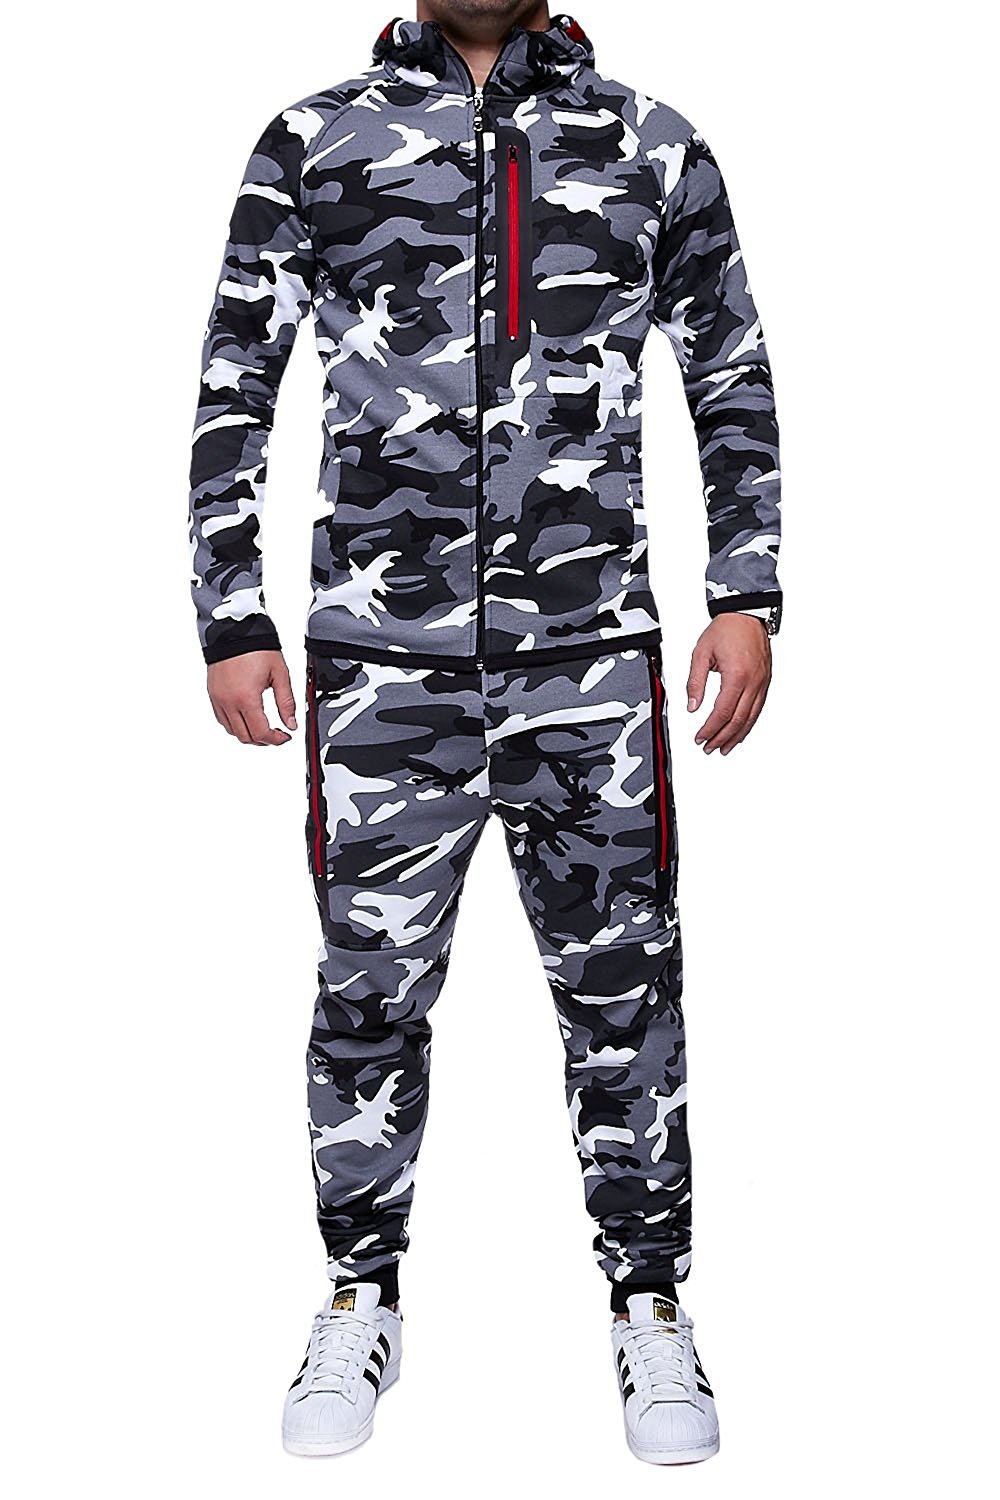 Hoodies camouflage sports suit - CJdropshipping